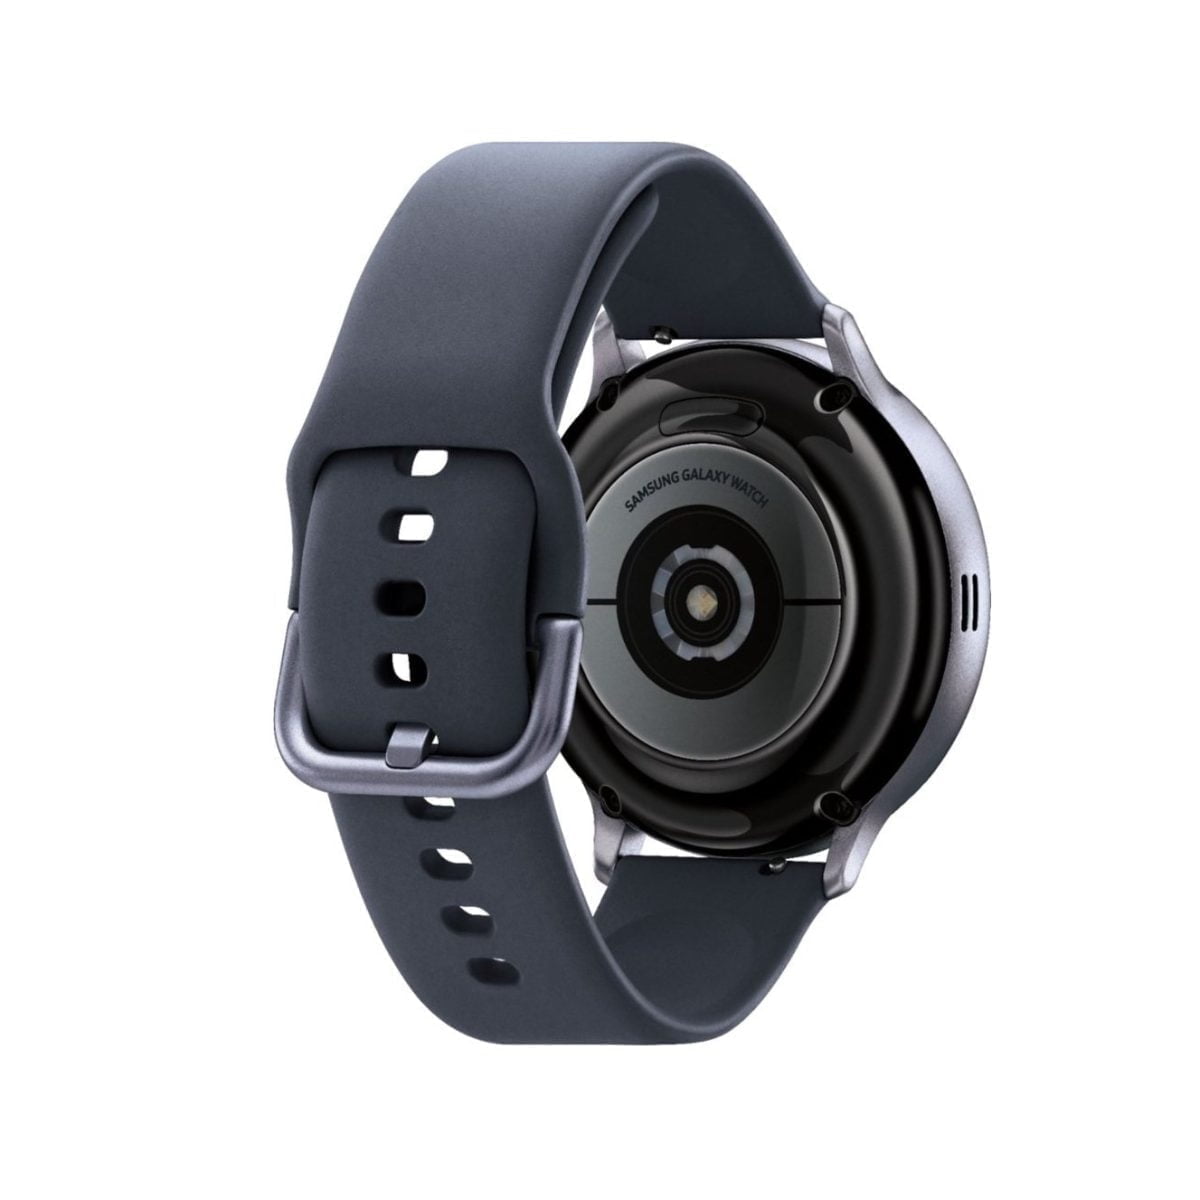 6360438Cv11D Samsung &Lt;H1 Class=&Quot;Heading-5 V-Fw-Regular&Quot;&Gt;Samsung - Galaxy Watch Active2 Smartwatch 44Mm Aluminum - Aqua Black &Lt;Strong&Gt;Model&Lt;/Strong&Gt;:&Lt;Span Class=&Quot;Product-Data-Value Body-Copy&Quot; Style=&Quot;Color: #333333; Font-Size: 16Px;&Quot;&Gt;Sm-R820Nzkaxar&Lt;/Span&Gt;&Lt;/H1&Gt; Https://Www.youtube.com/Watch?V=Cu0-Lhyhgu4 &Lt;Div Class=&Quot;Long-Description-Container Body-Copy &Quot;&Gt; &Lt;Div Class=&Quot;Html-Fragment&Quot;&Gt; &Lt;Div&Gt; &Lt;Div&Gt;Enhance Your Sporting Performance With This Samsung Galaxy Watch Active2 Bluetooth Smartwatch. Monitor Your Workouts And Receive Detailed Reports On Your Performance Even As The Running Coach Feature Gives You Important Insight In Real-Time. This Samsung Galaxy Watch Active2 Bluetooth Smartwatch Analyses Your Sleep Pattern And Offers Helpful Advice On How To Improve It.&Lt;/Div&Gt; &Lt;/Div&Gt; &Lt;/Div&Gt; &Lt;/Div&Gt;  Samsung Galaxy Watch Active2 Samsung Galaxy Watch Active2 Smartwatch 44Mm Aluminum - Aqua Black